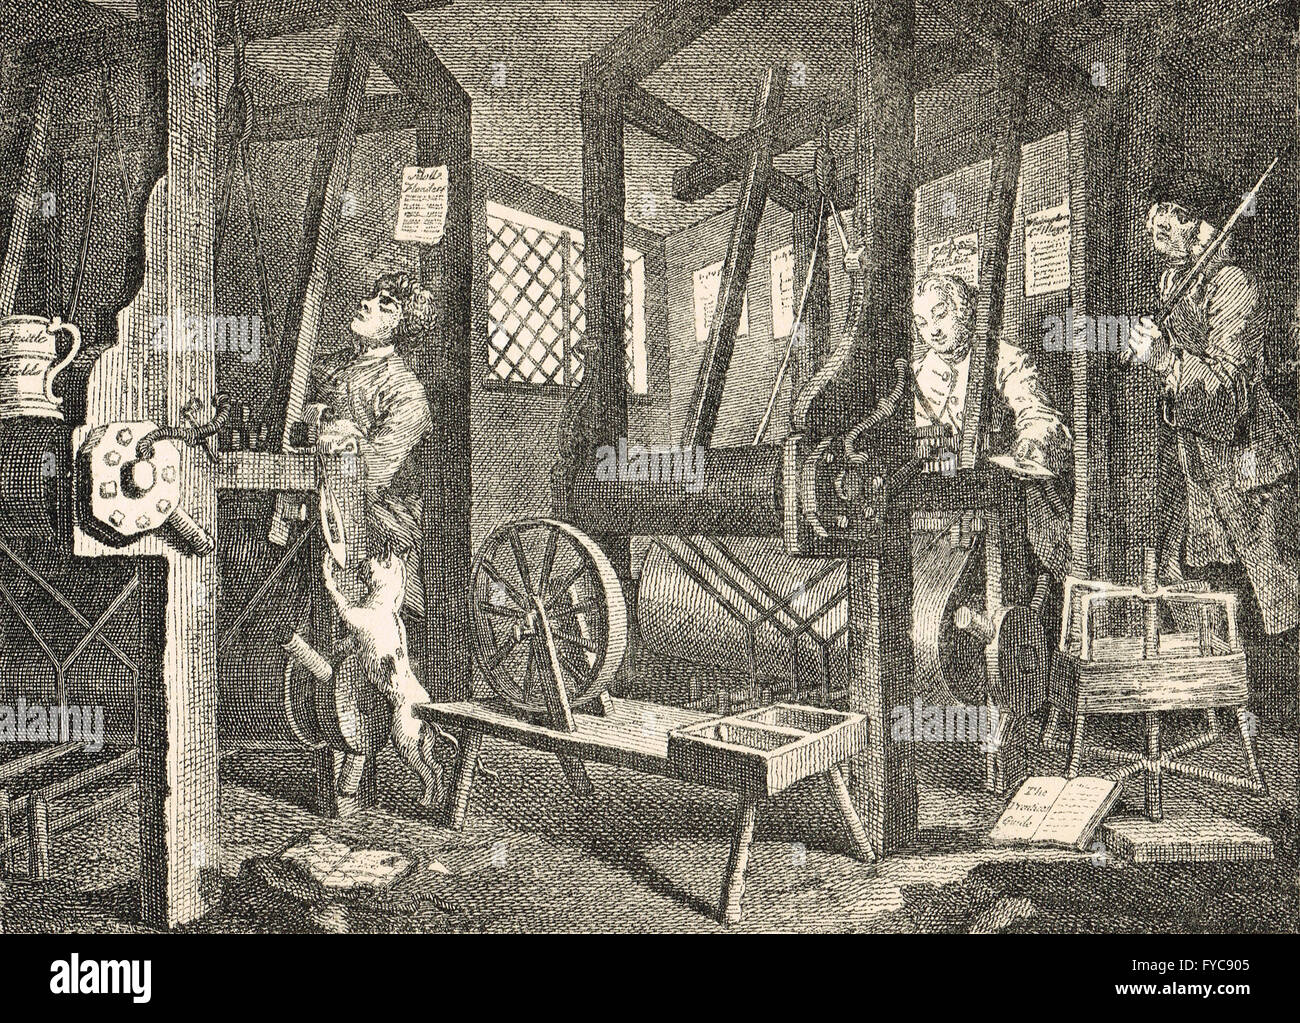 Industry & Idleness Plate 1 The Fellow 'Prentices at their Looms by William Hogarth circa 1747 Stock Photo